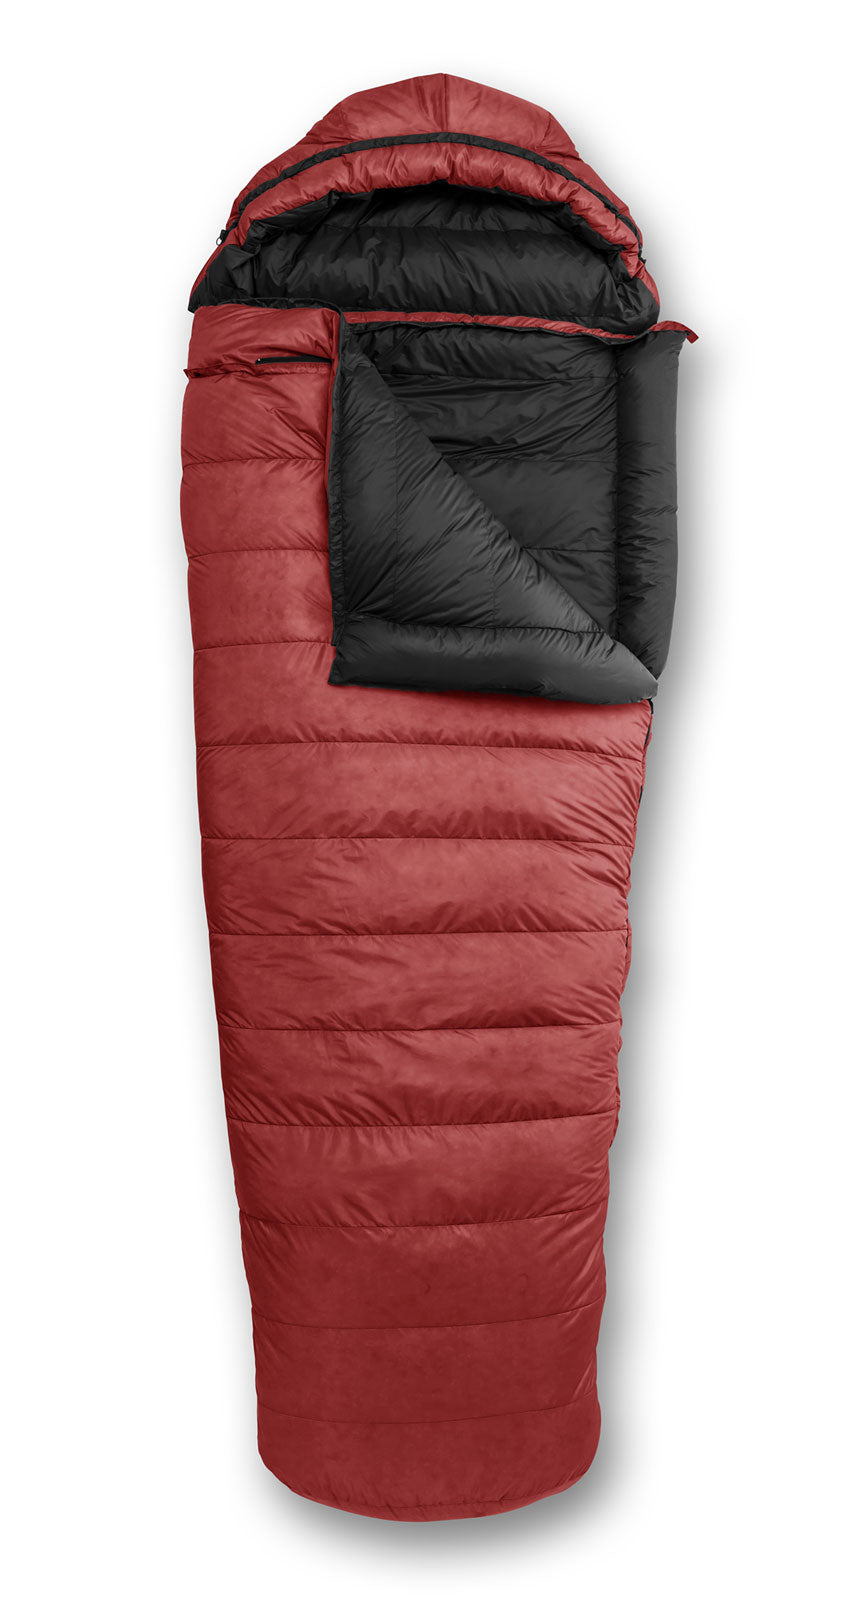 Feathered Friends Penguin YF Sleeping Bag Cardinal Red with optional hood